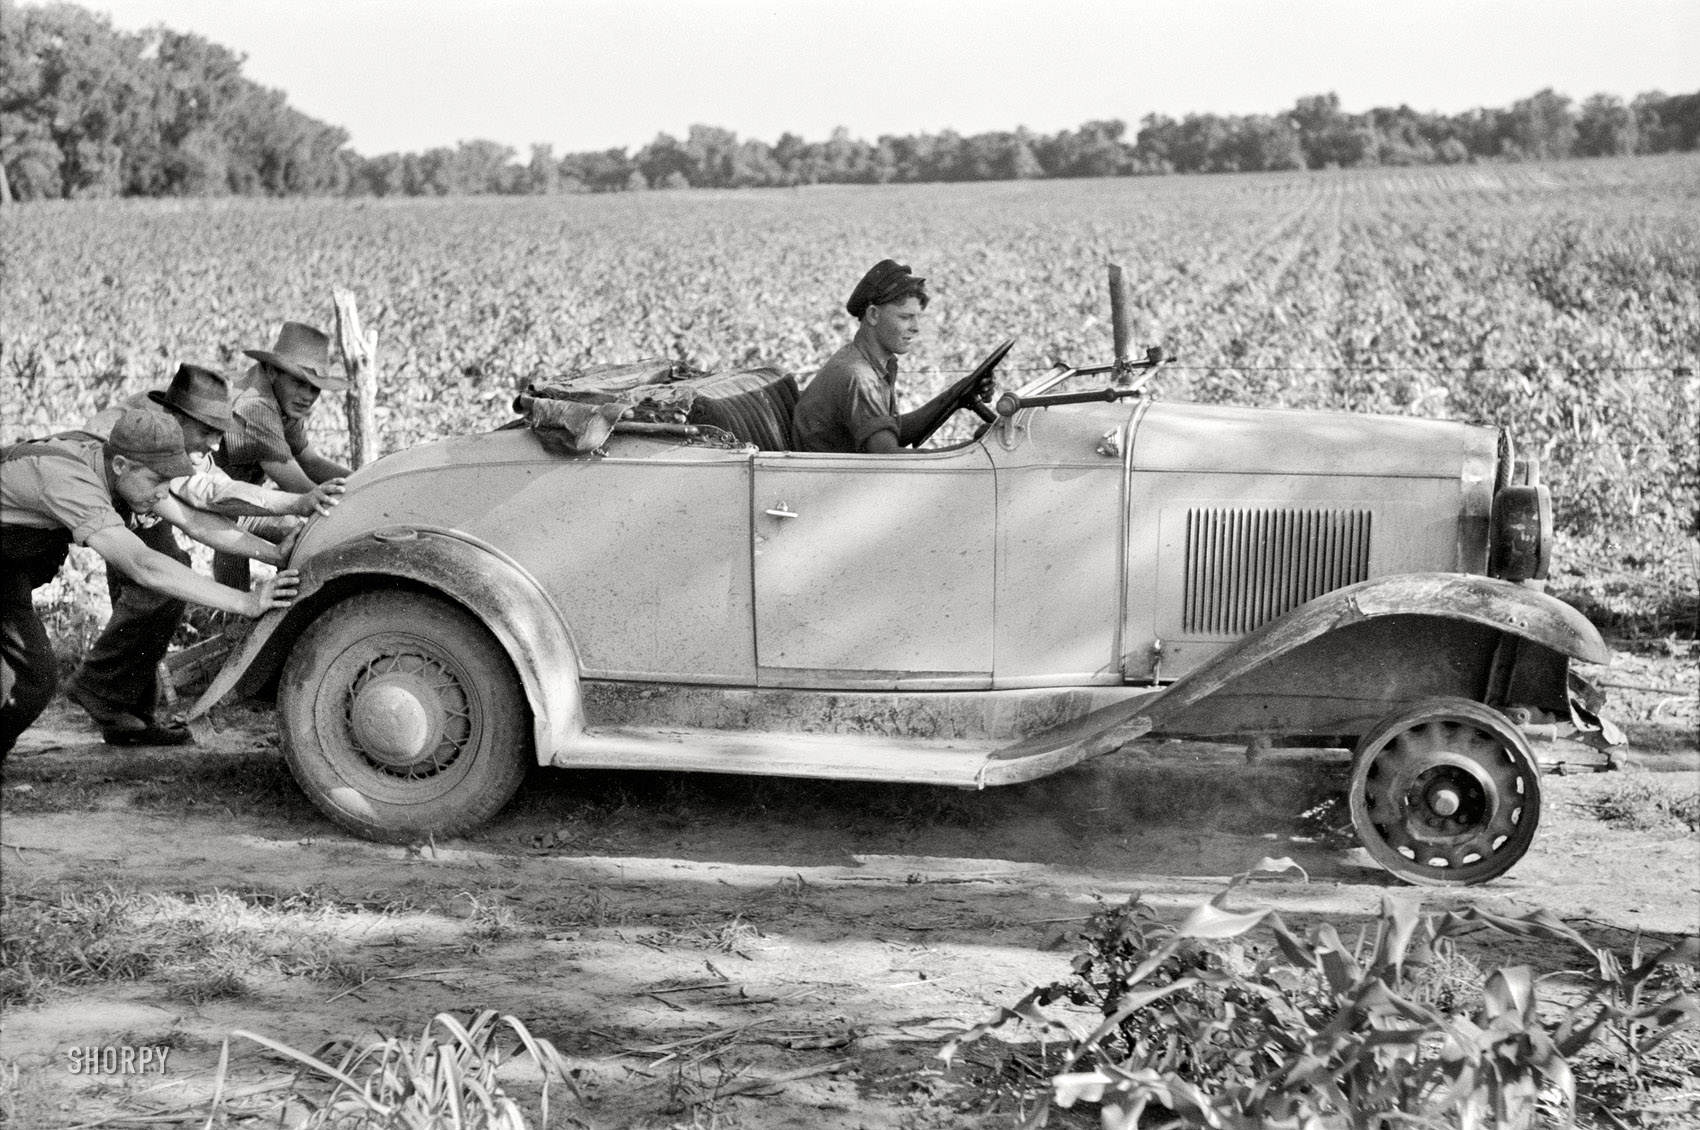 June 1939. "Pushing a car belonging to agricultural day laborer to start it, near Muskogee, Oklahoma." 35mm nitrate negative by Russell Lee. View full size.